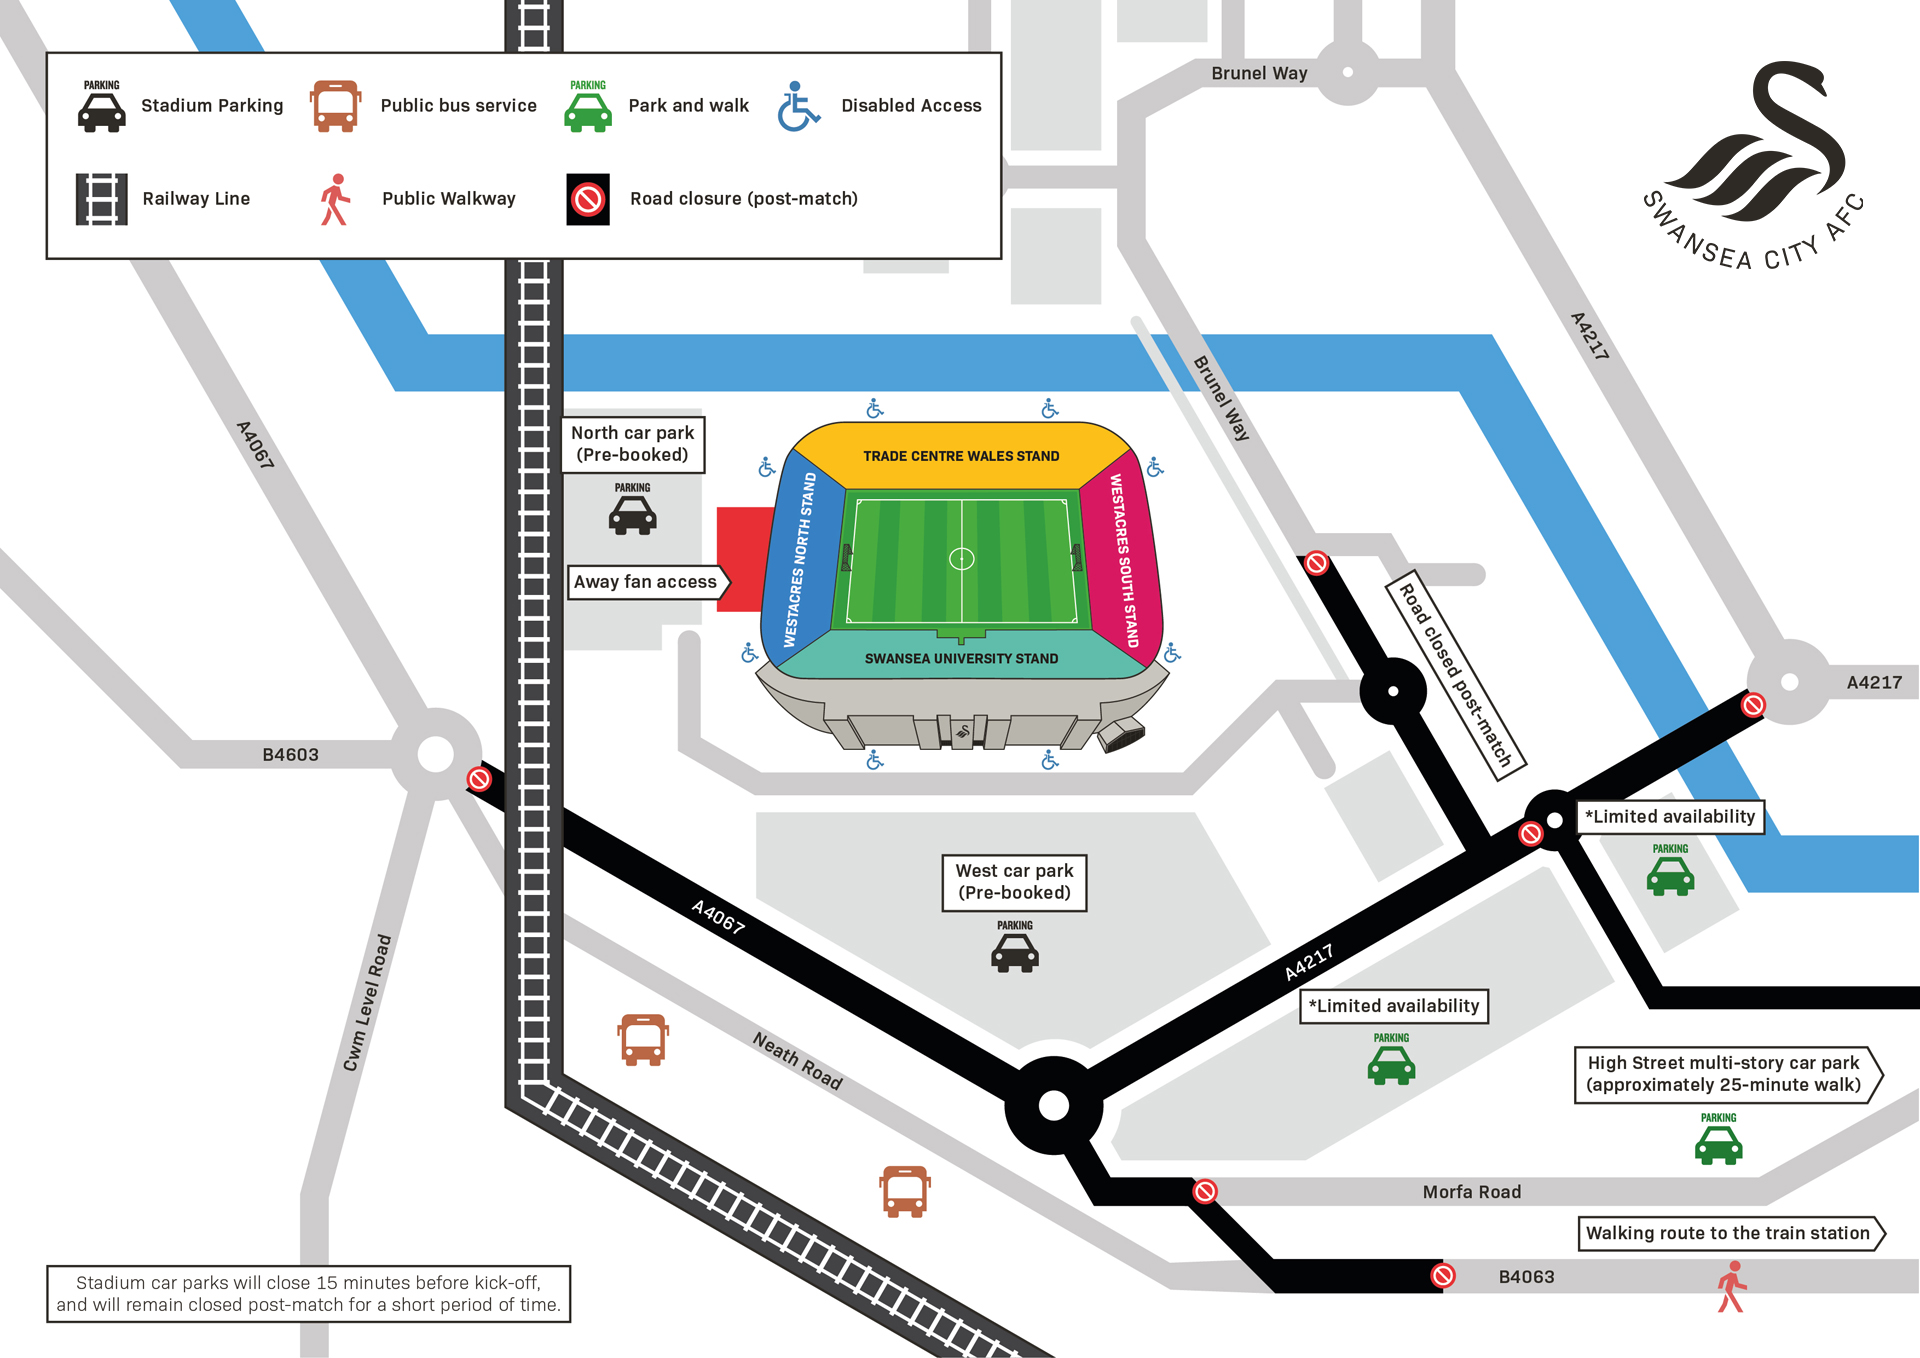 Map of the Swansea City stadium showing directions from park and walk